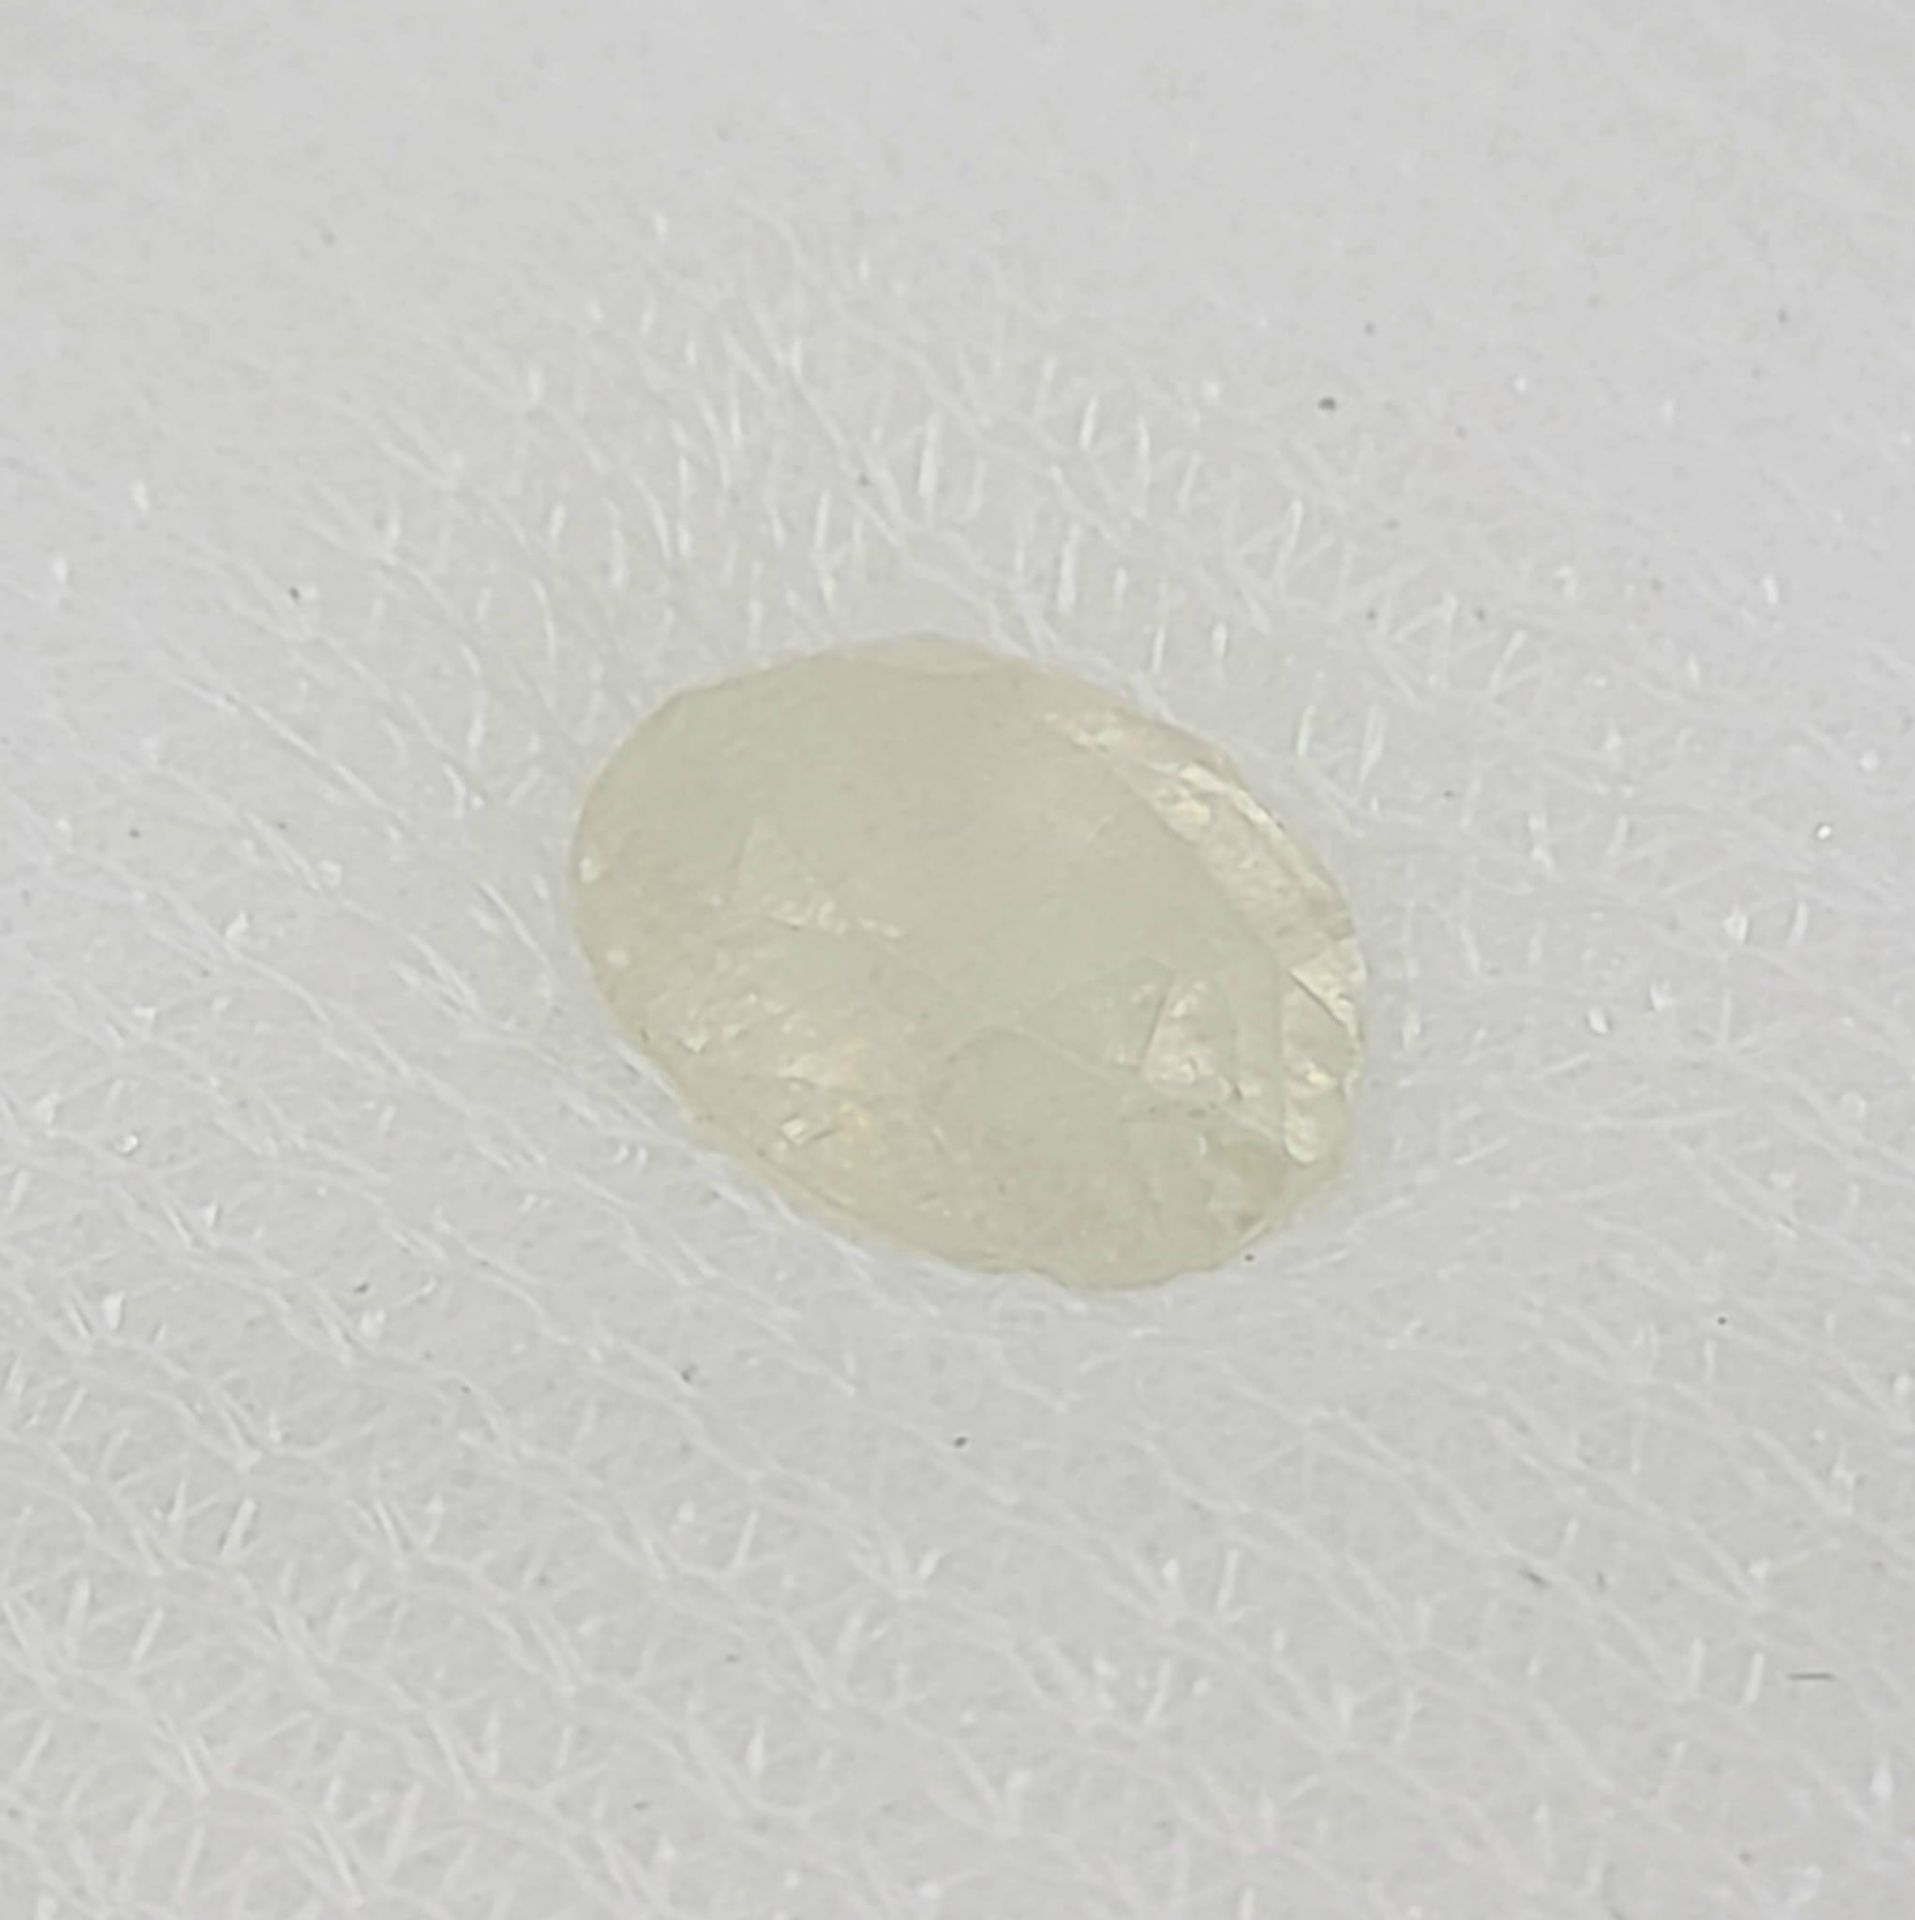 A 2.40ct Untreated Yellow Sapphire Gemstone. AIG American Gem Lab Certified. Comes in a sealed